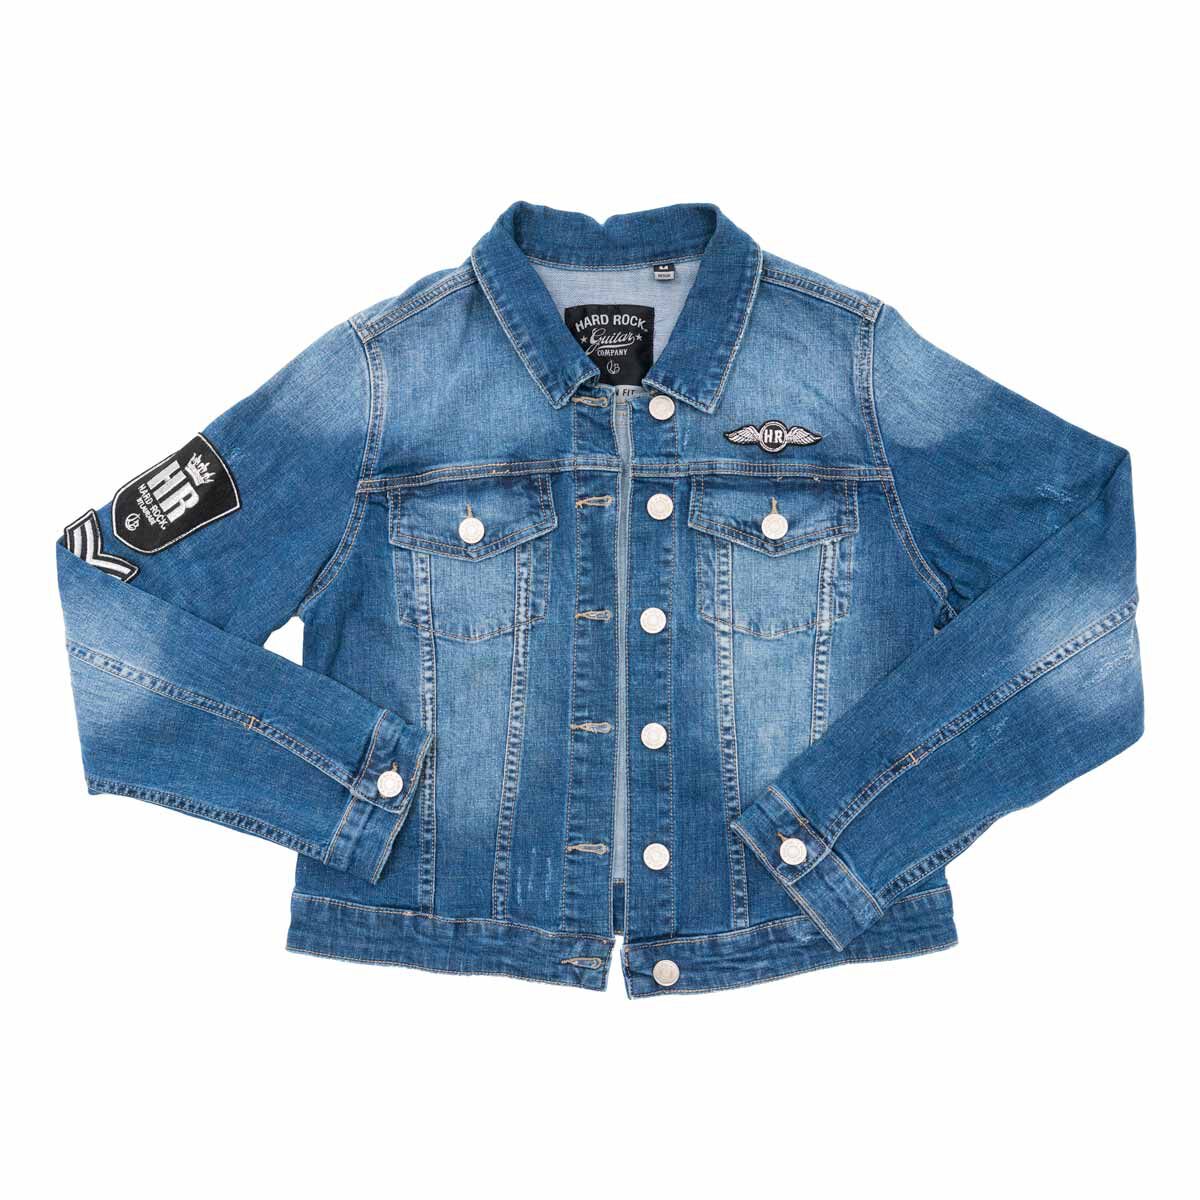 Sequin Wing Denim Jacket by Guitar Company